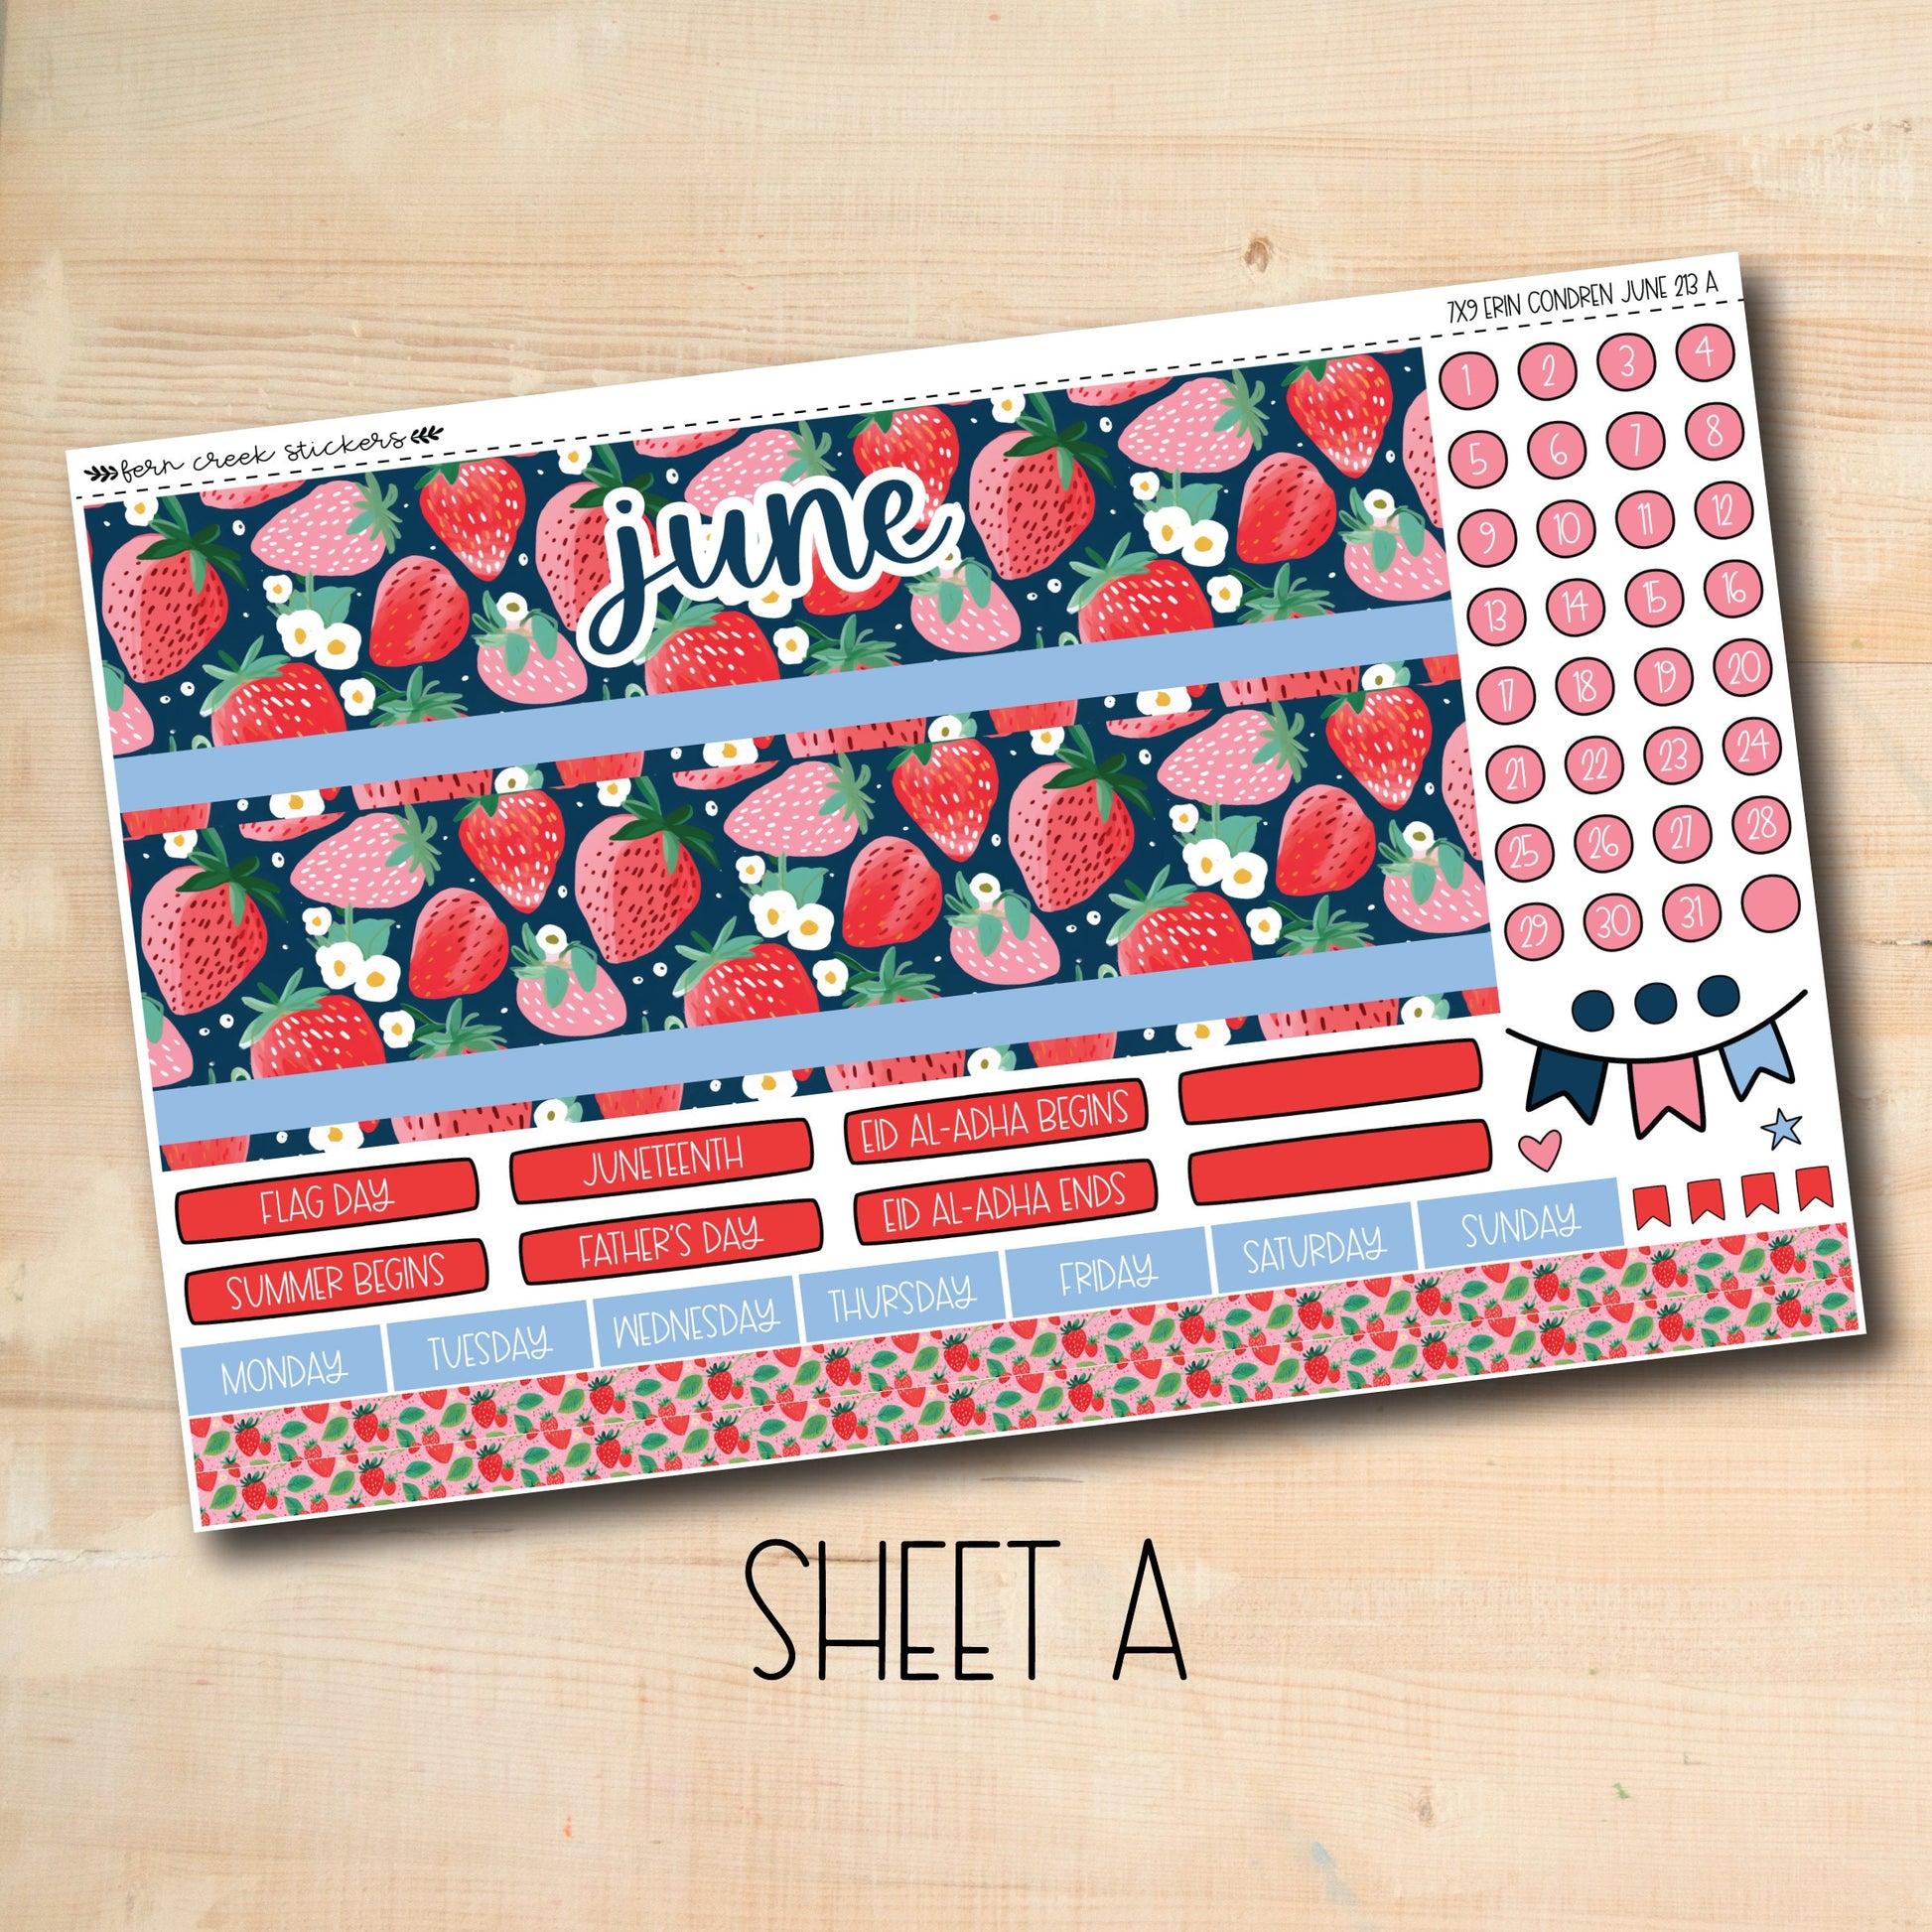 a sticker sheet with strawberries on it